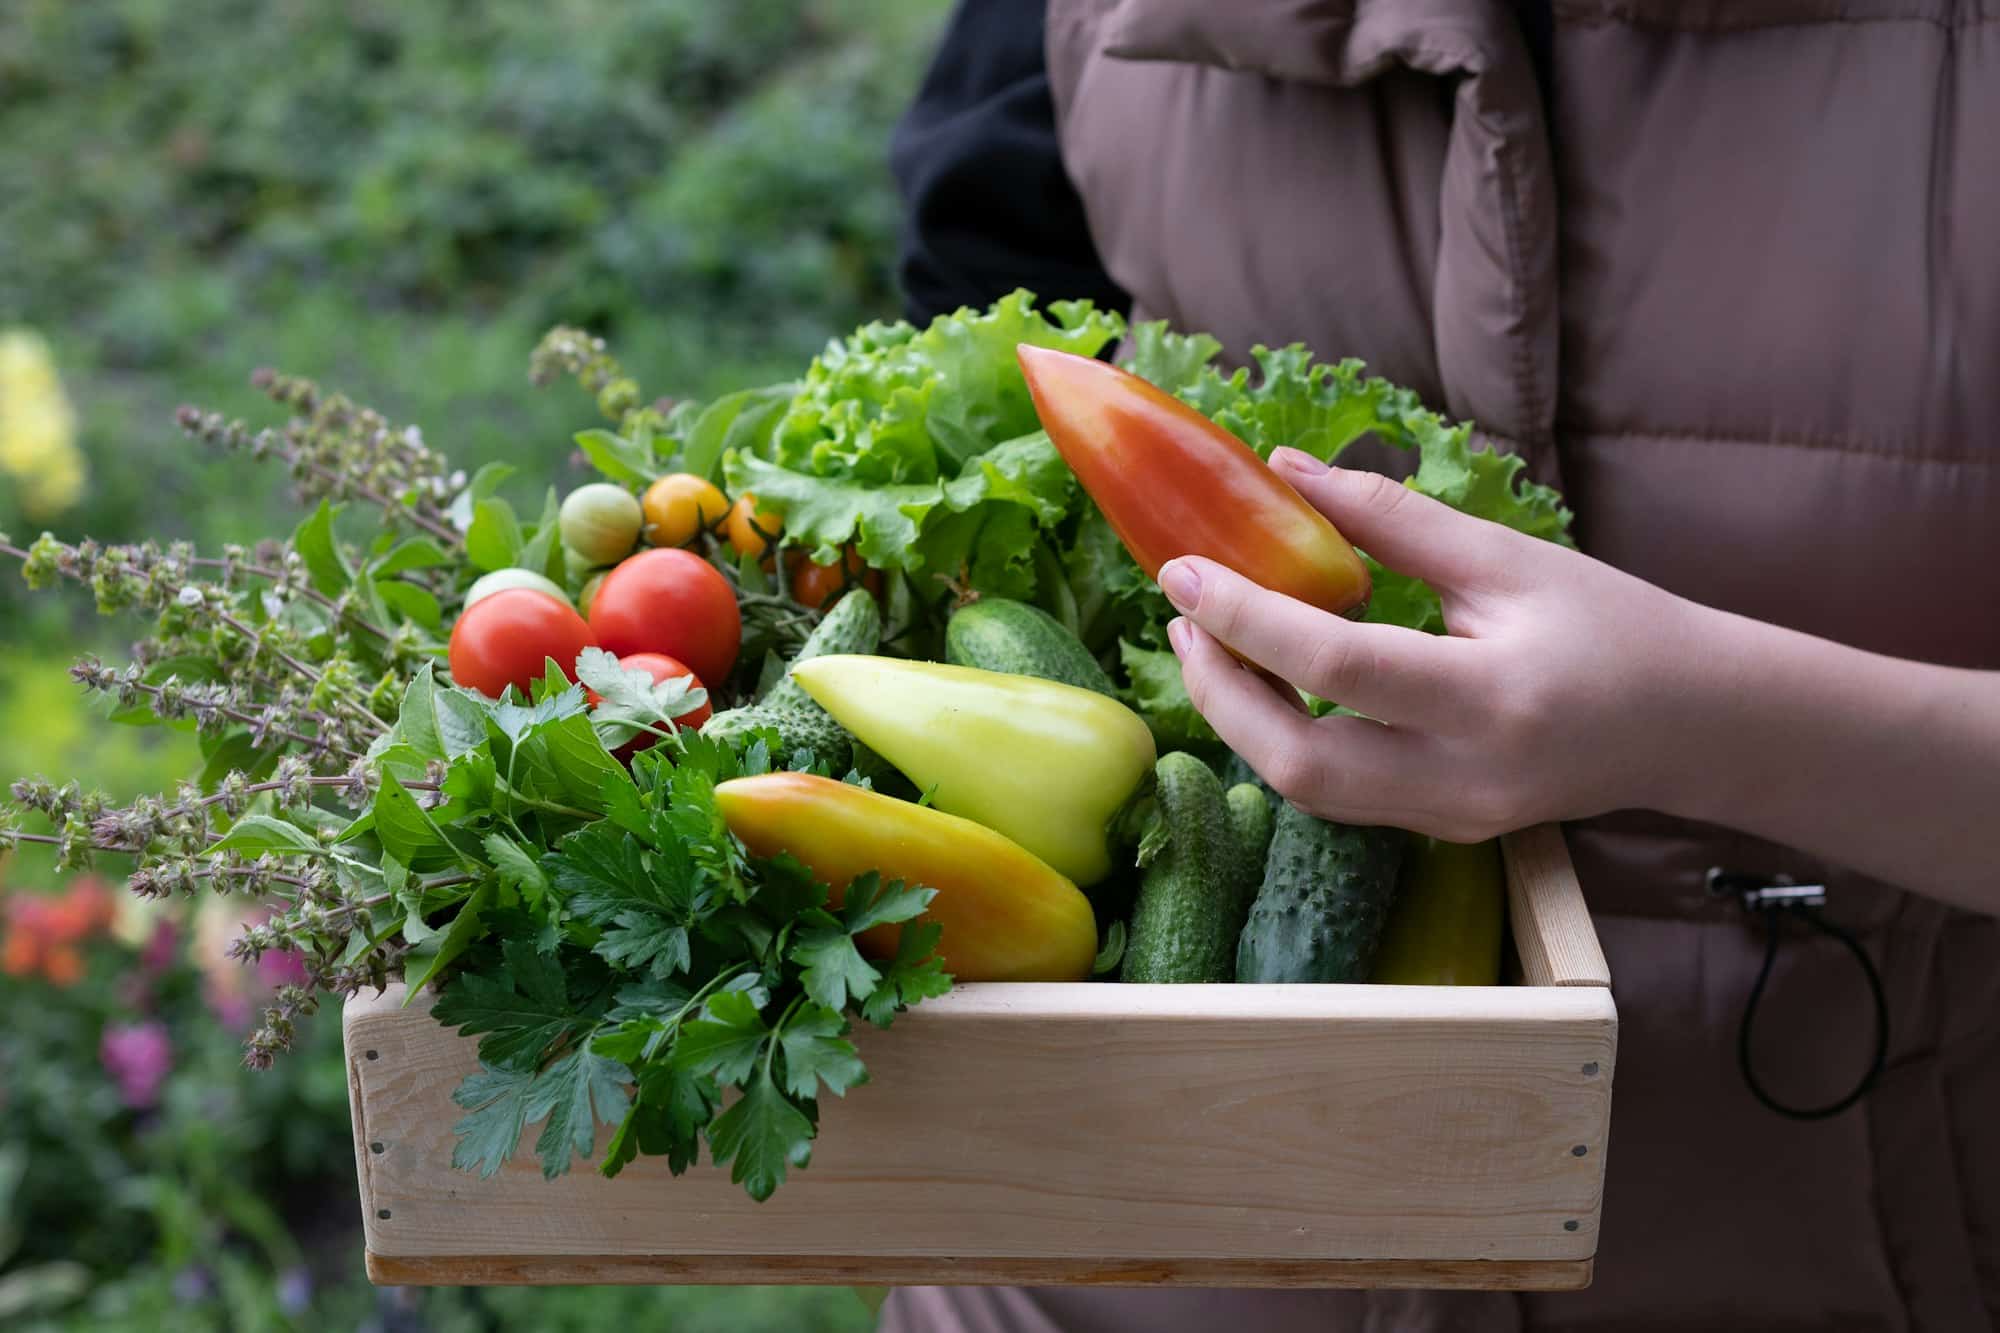 The older woman holds a box of vegetables